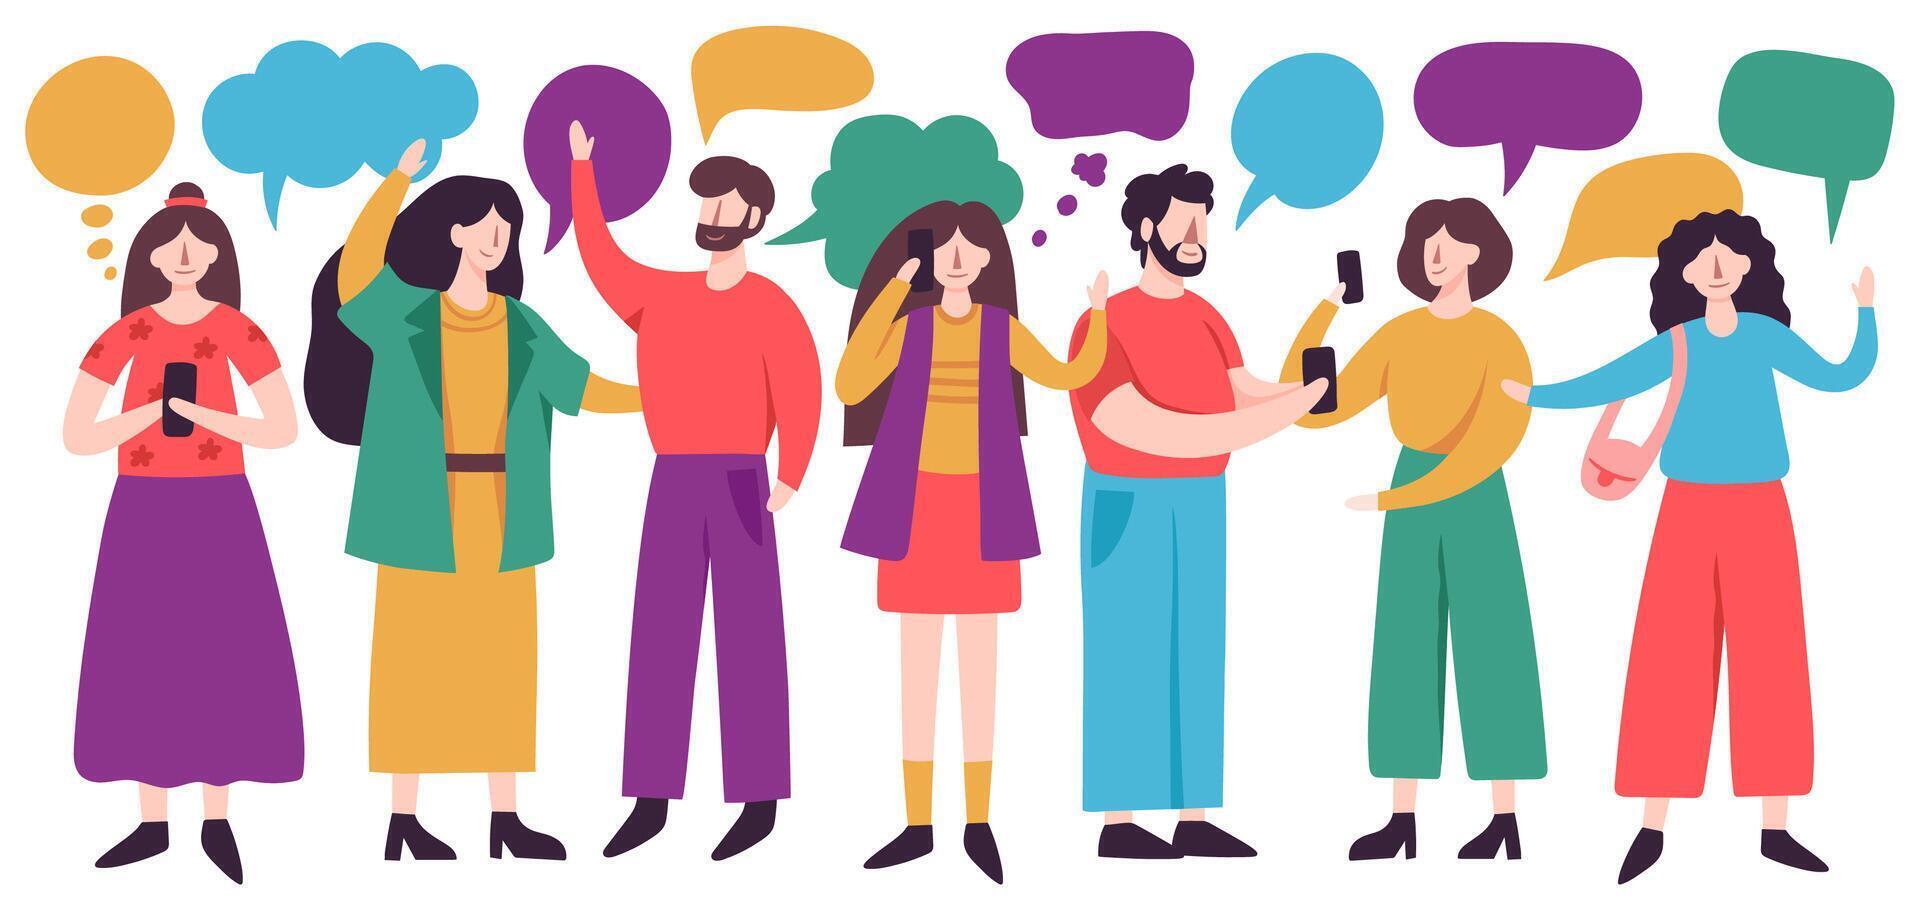 People conversation. Male and female characters chatting with speech bubbles, friends conversation. Social networking vector illustrations